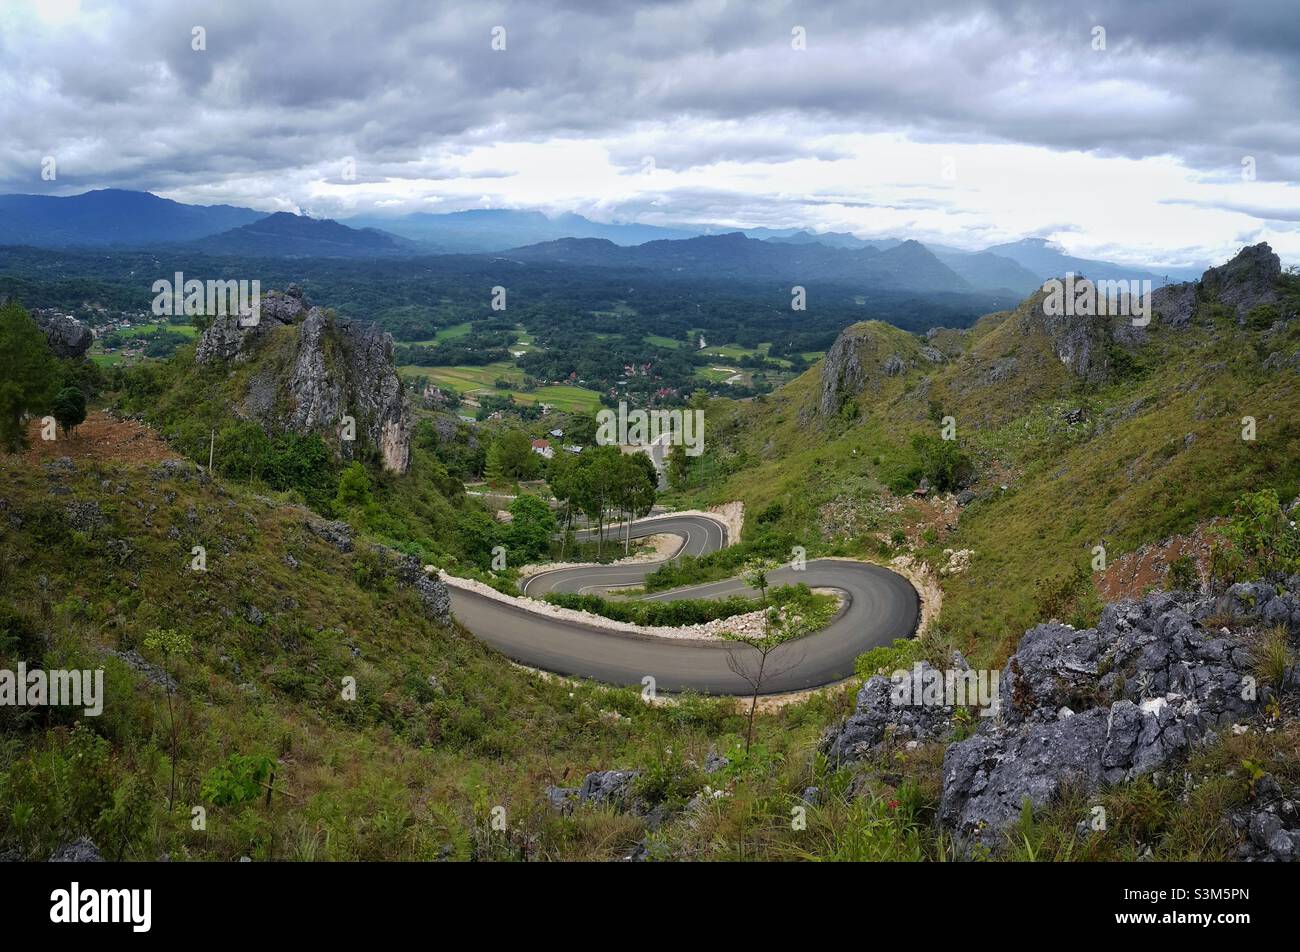 The winding roads of Burake hills where stand the statue of Jesus Christ Blesing at Makale in Tana Toraja Regency, South Sulawesi, Indonesia. Stock Photo